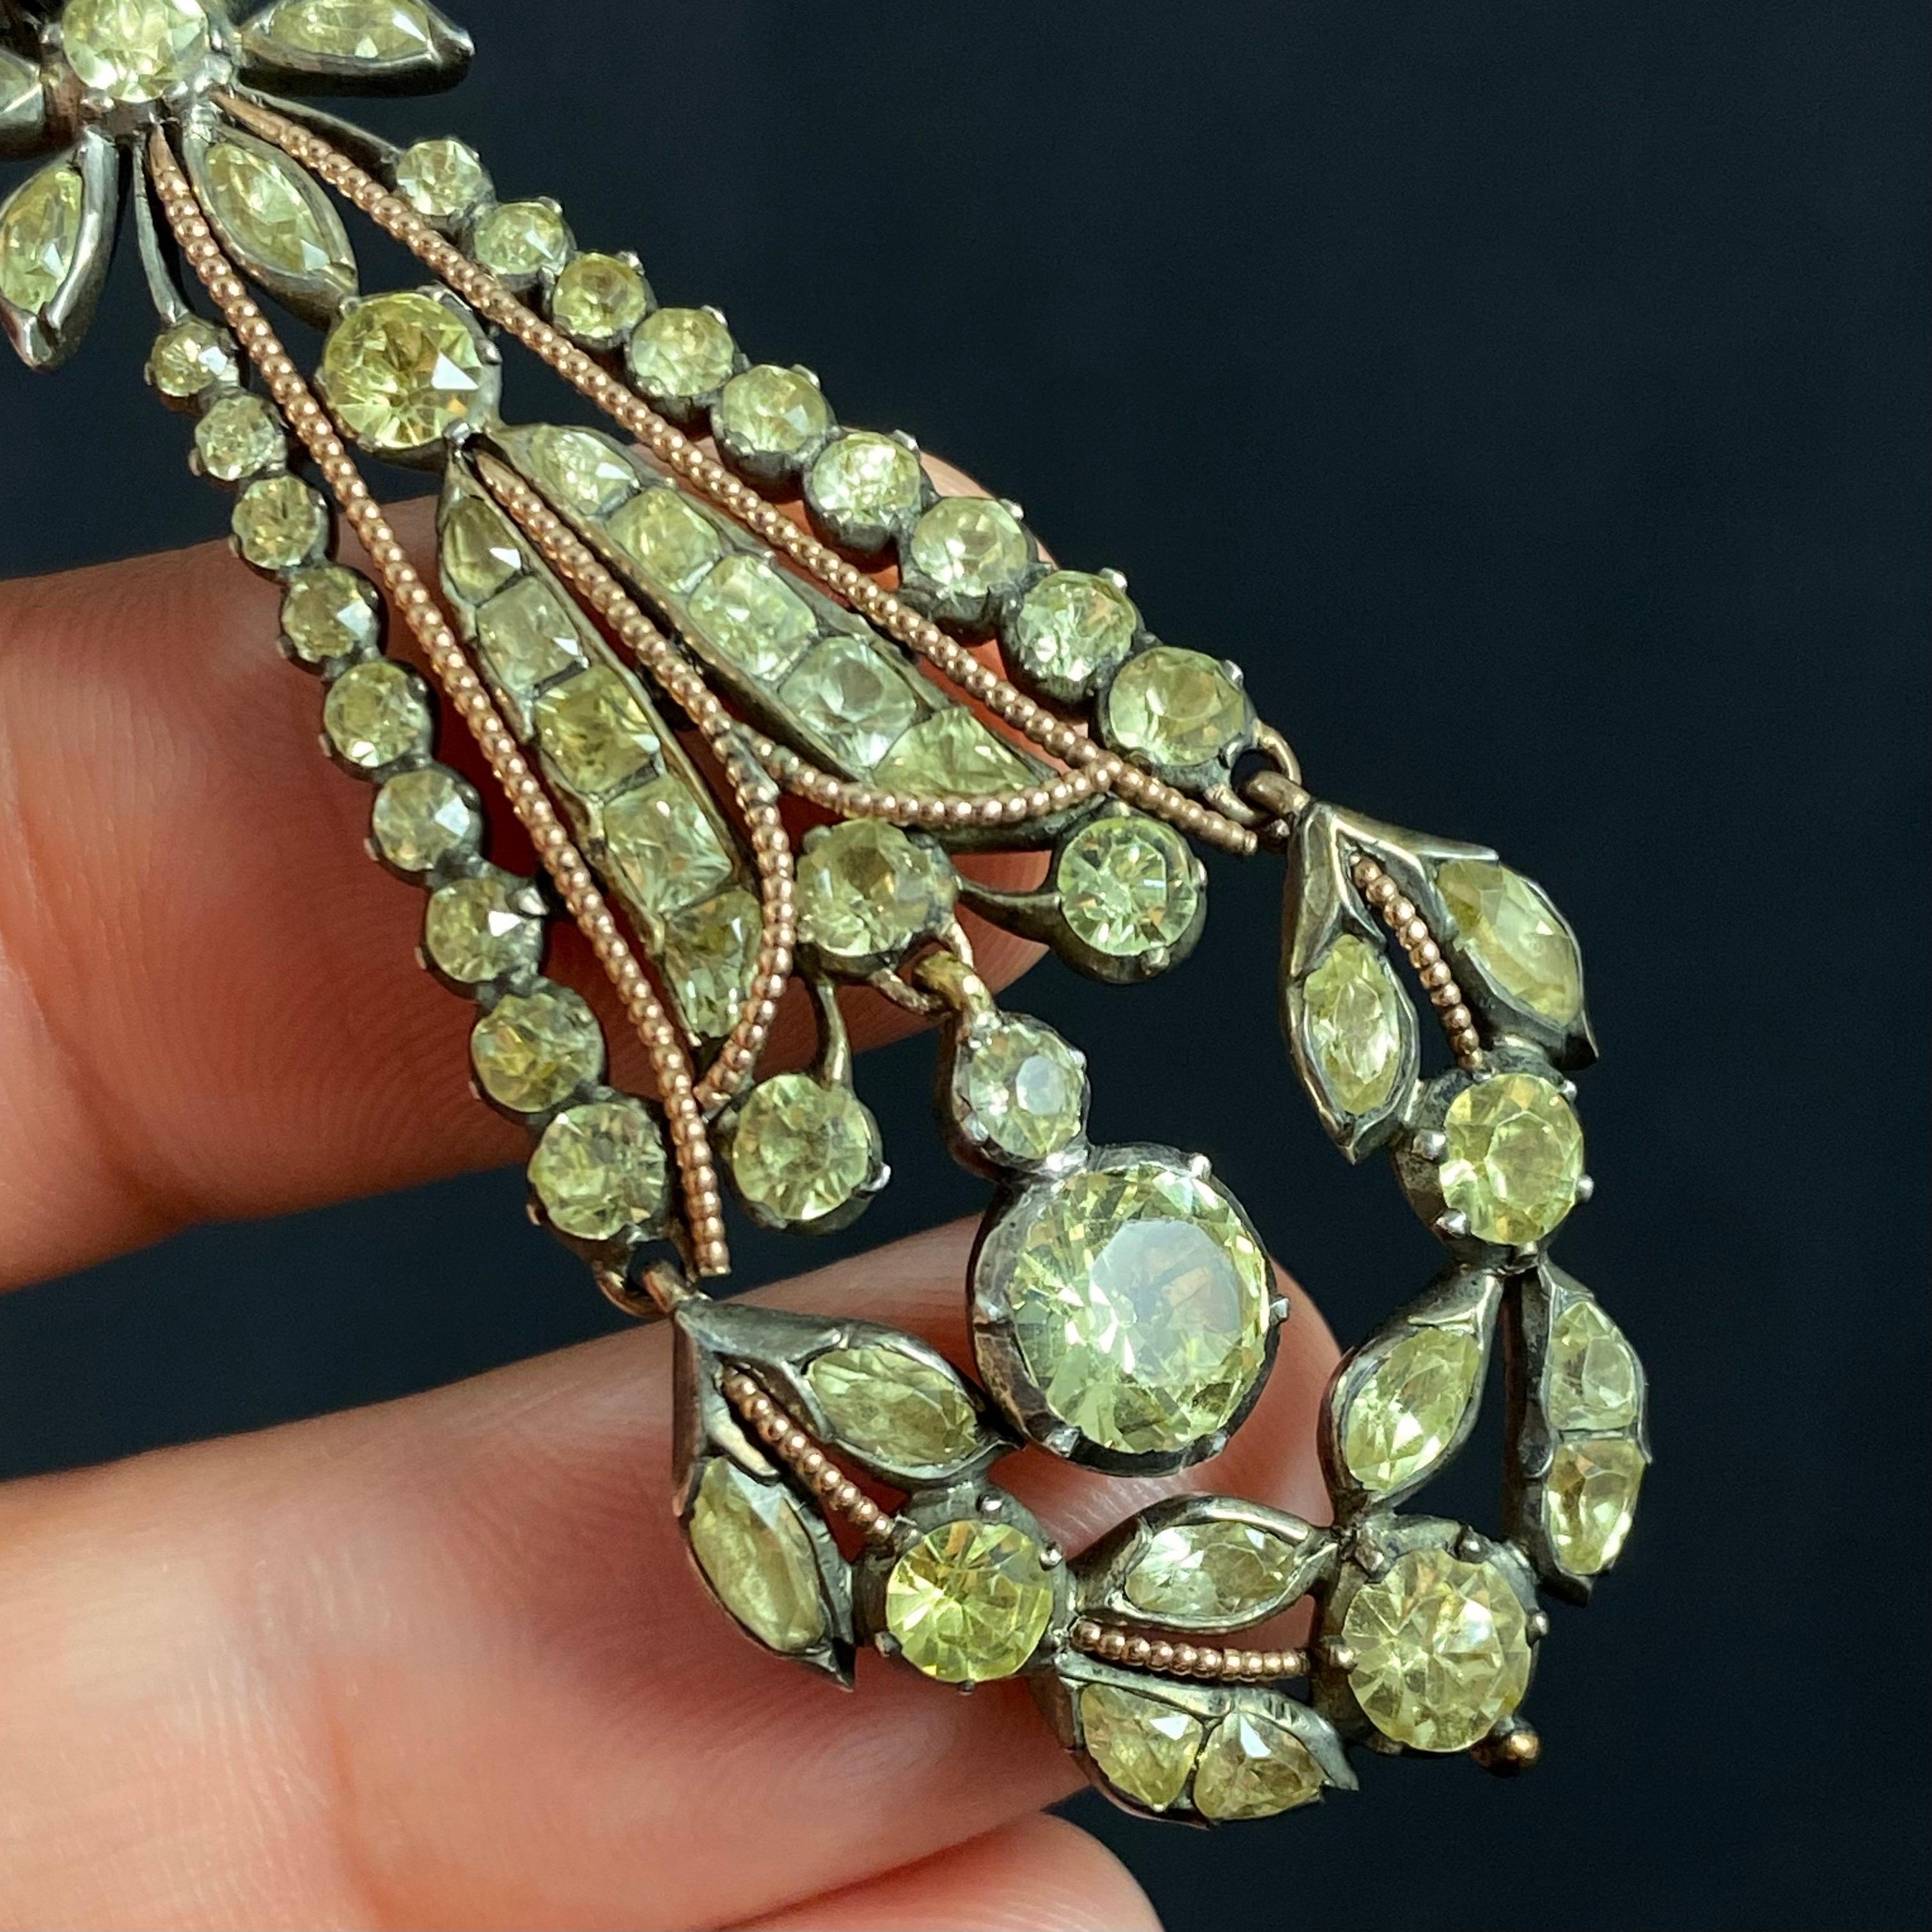 Antique 18th/19th Century Chrysolite Chrysoberyl Pendant Earrings Portuguese In Good Condition For Sale In Lisbon, PT